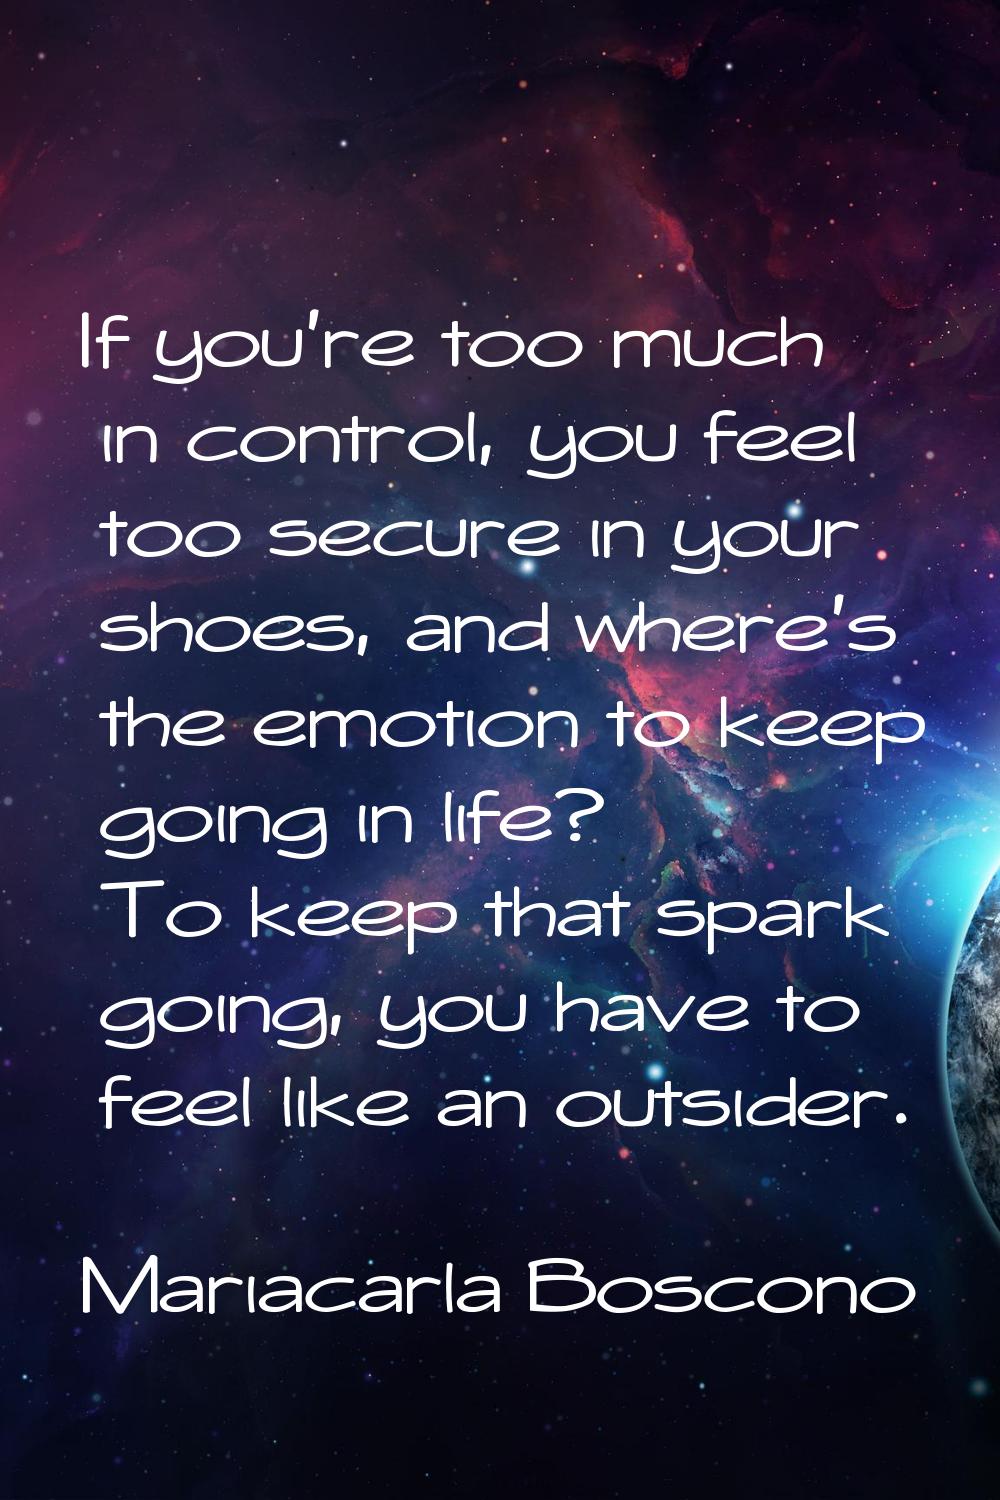 If you're too much in control, you feel too secure in your shoes, and where's the emotion to keep g